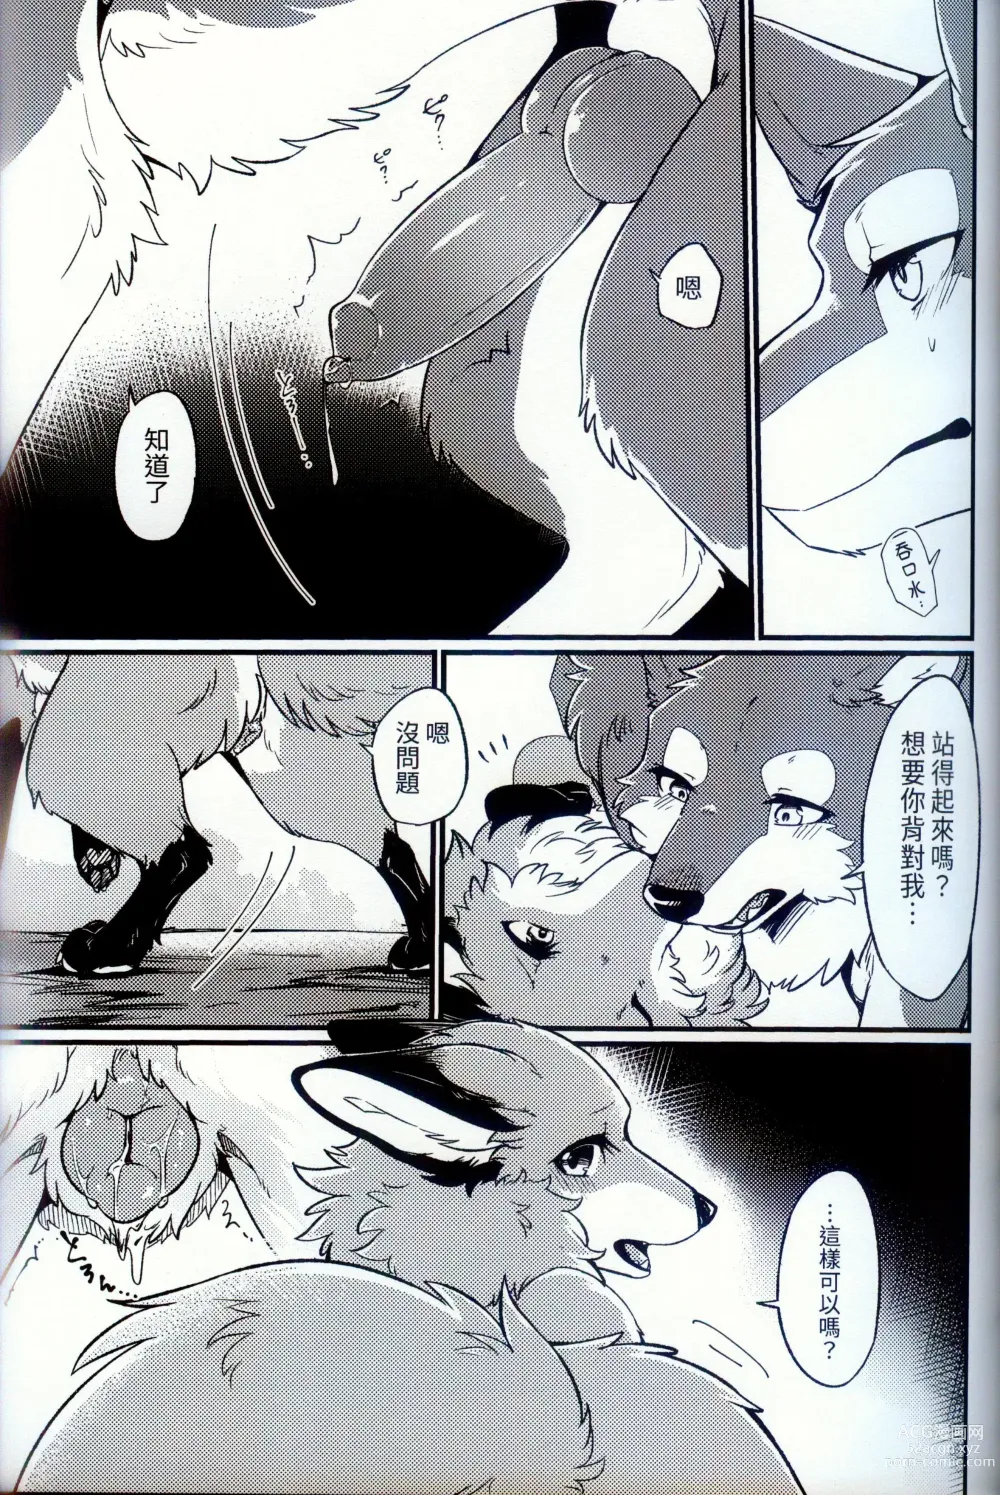 Page 7 of doujinshi IN THE FOREST (decensored)